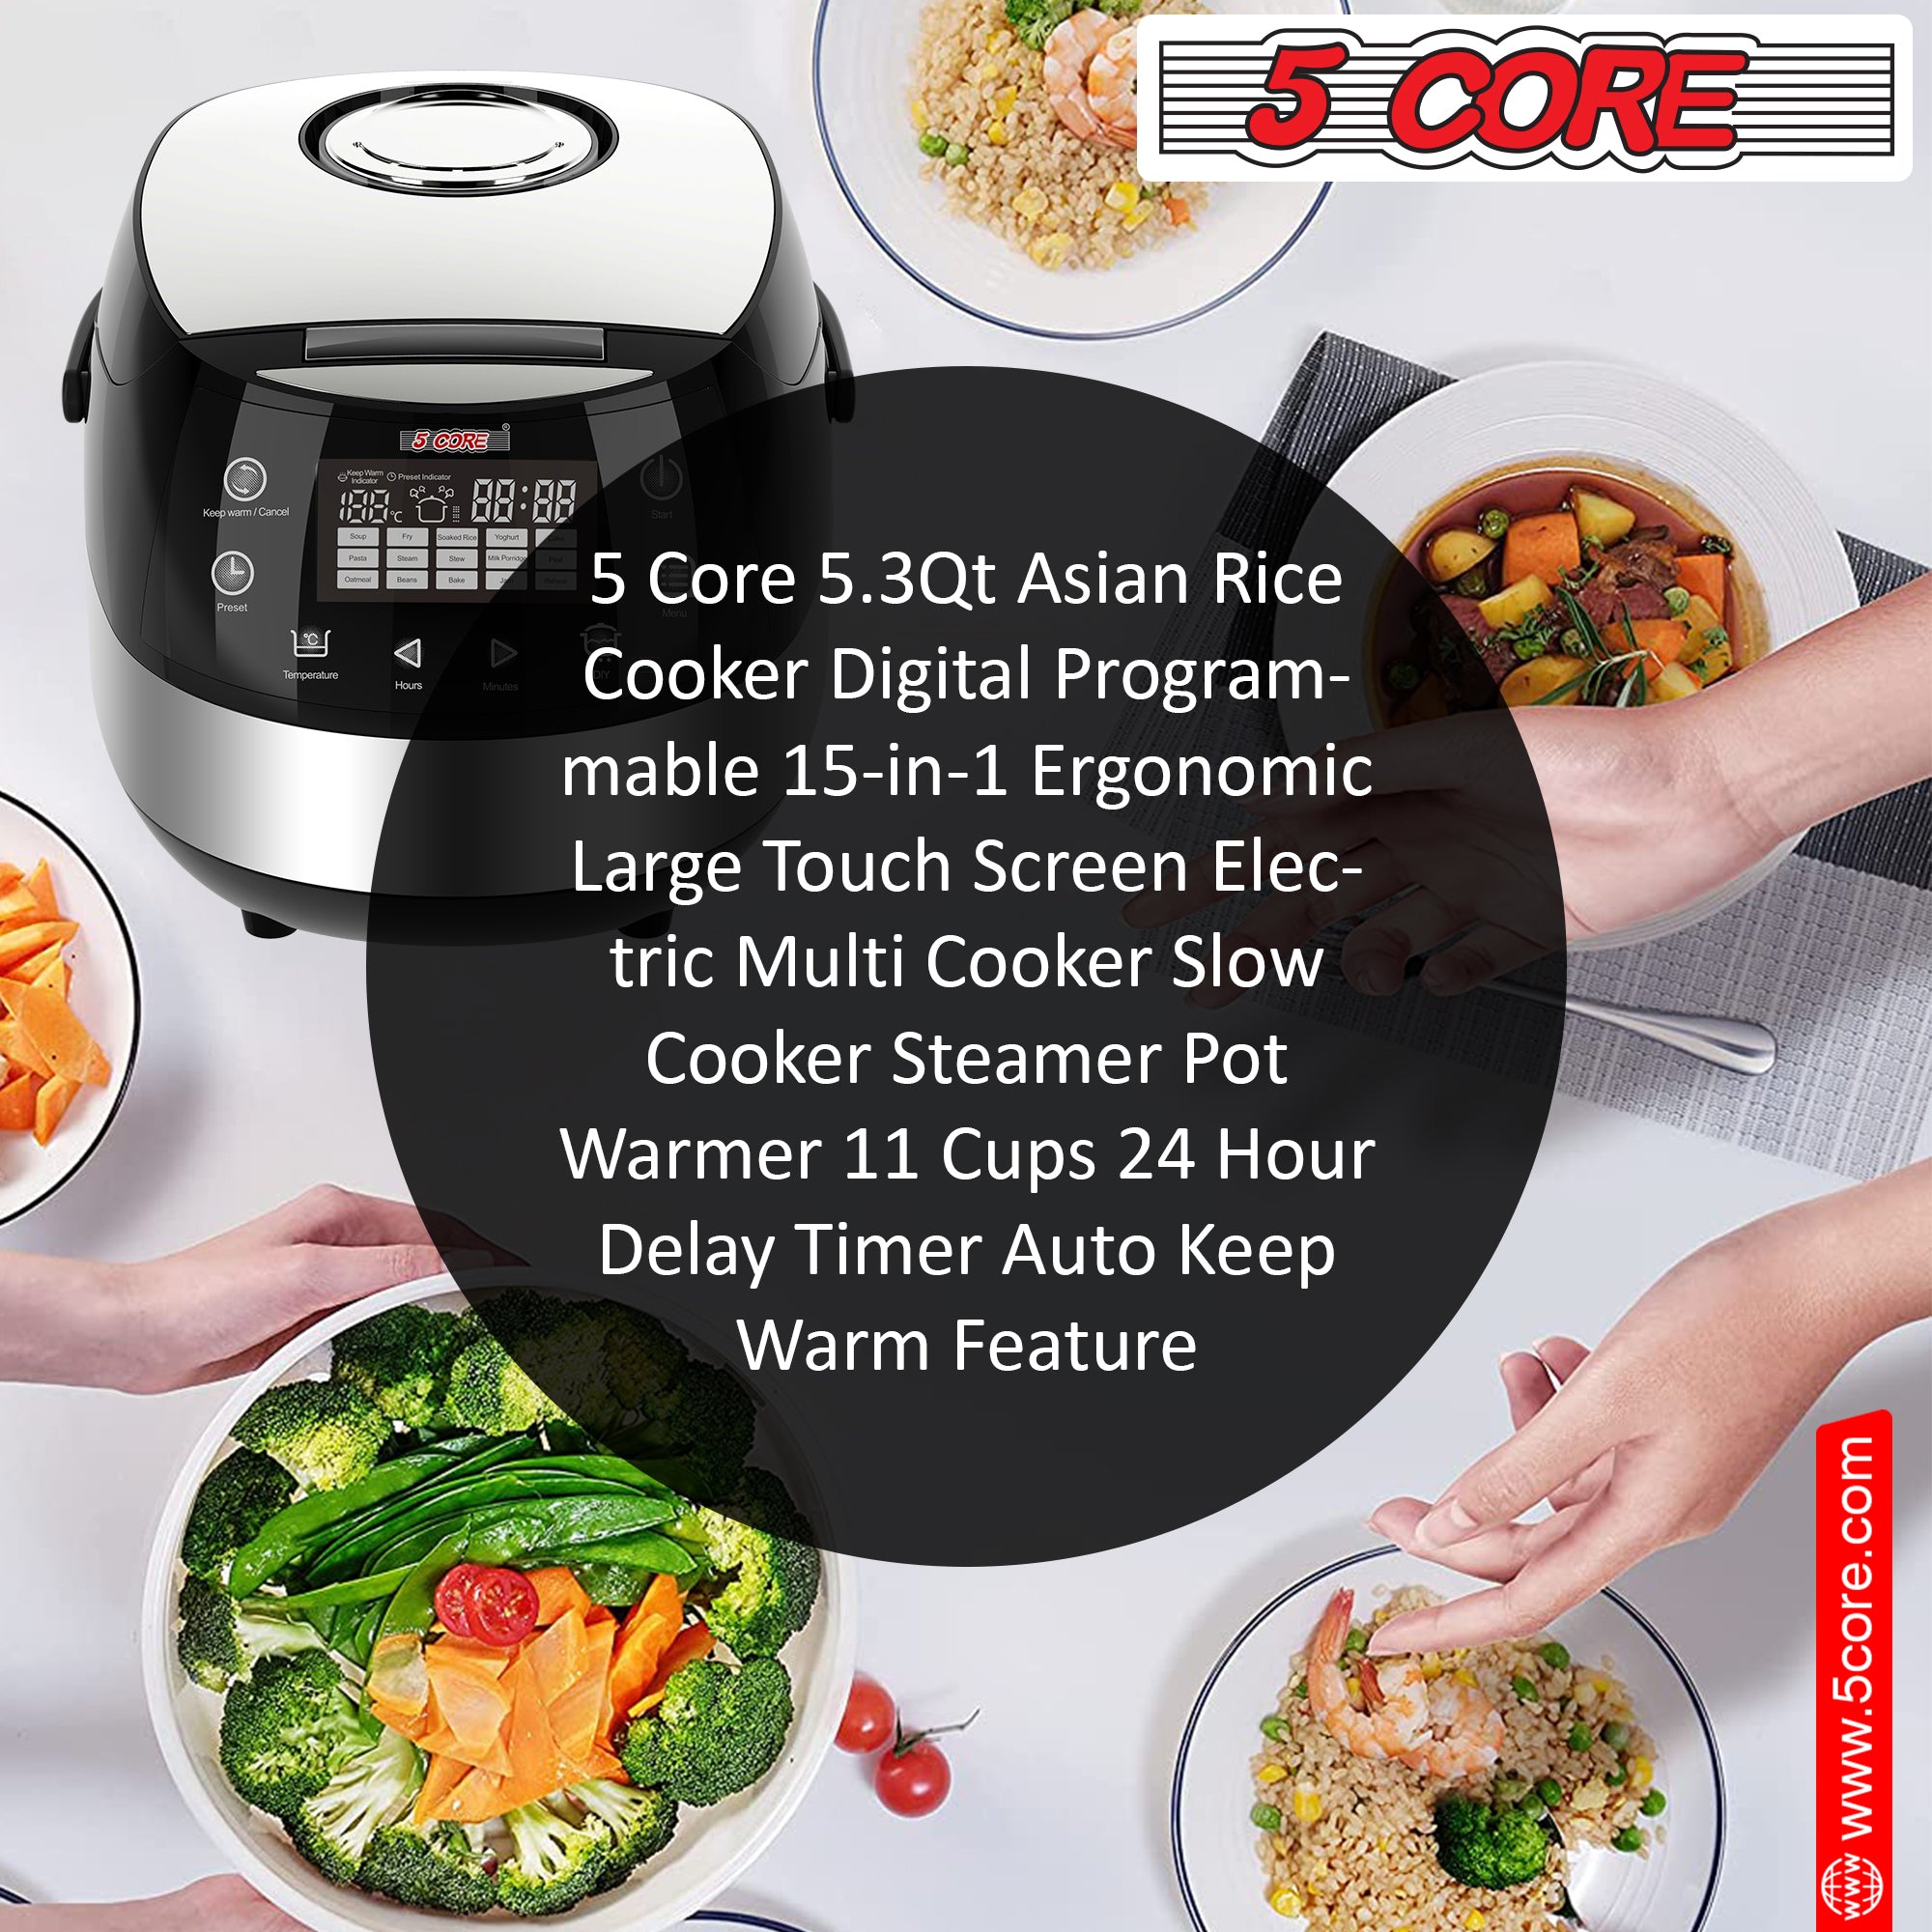 5 Core Asian Rice Cooker Black 5.3Qt Digital Programmable 15-in-1 Ergonomic Large Touch Screen Electric Multi Cooker Slow Cooker Steamer -RC 0501